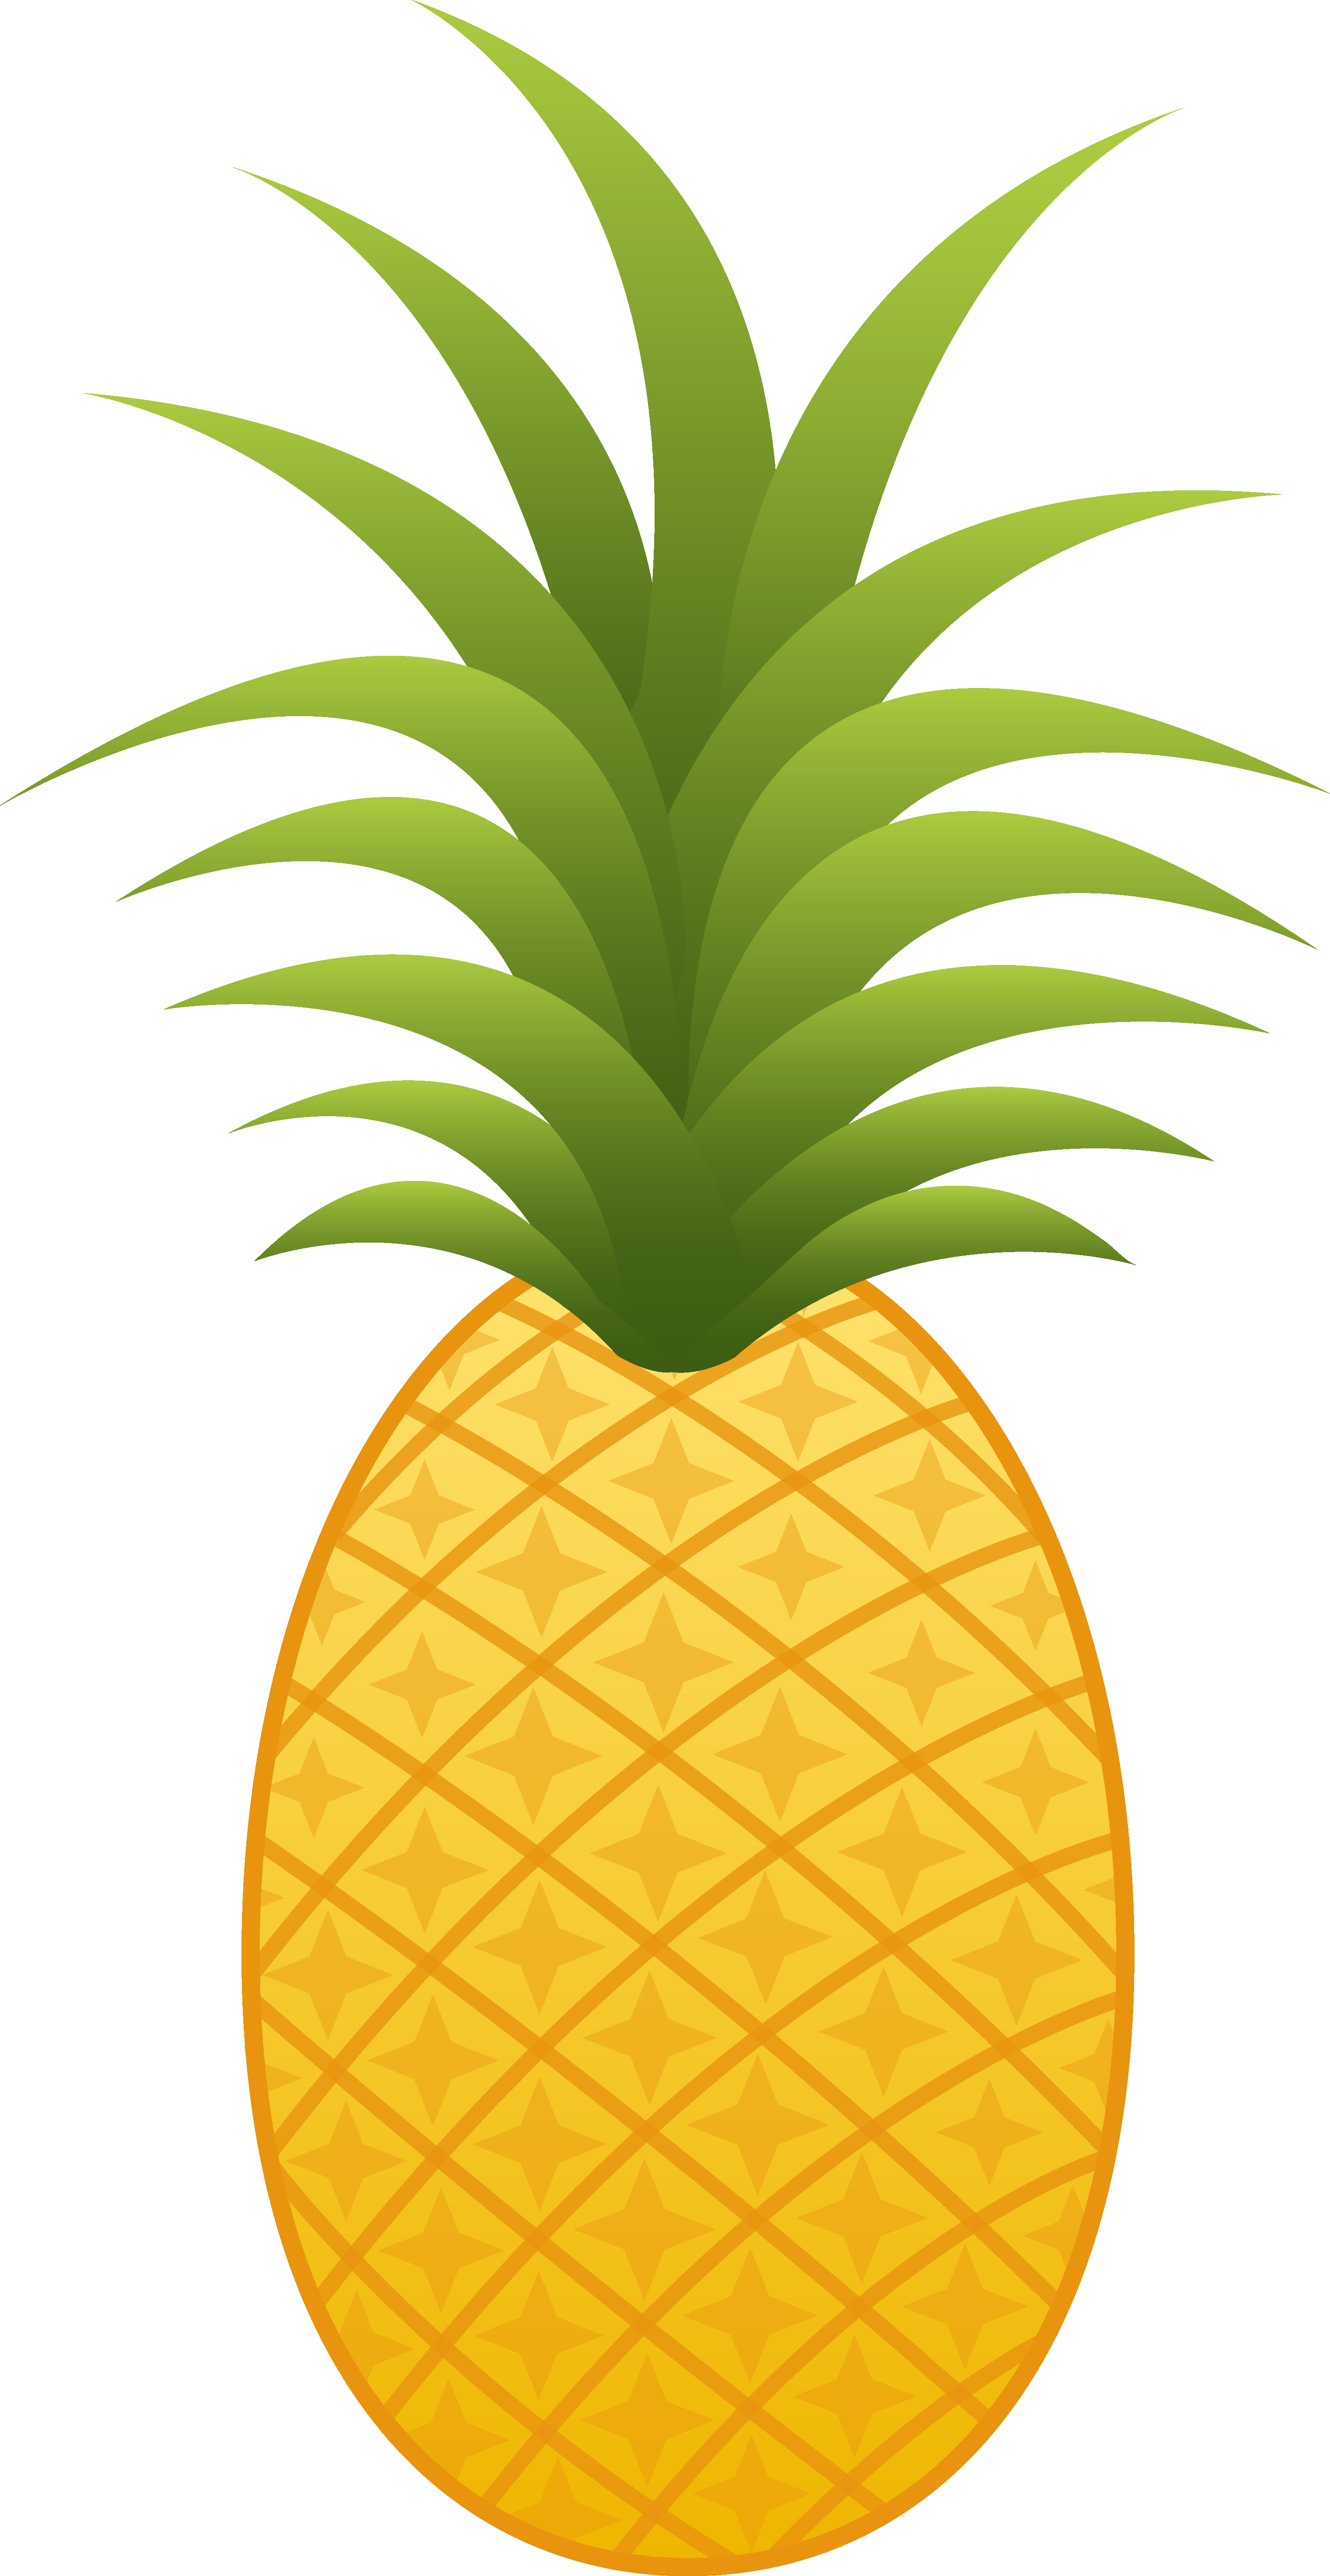 Free funky pineapple custom. Helping clipart others clipart